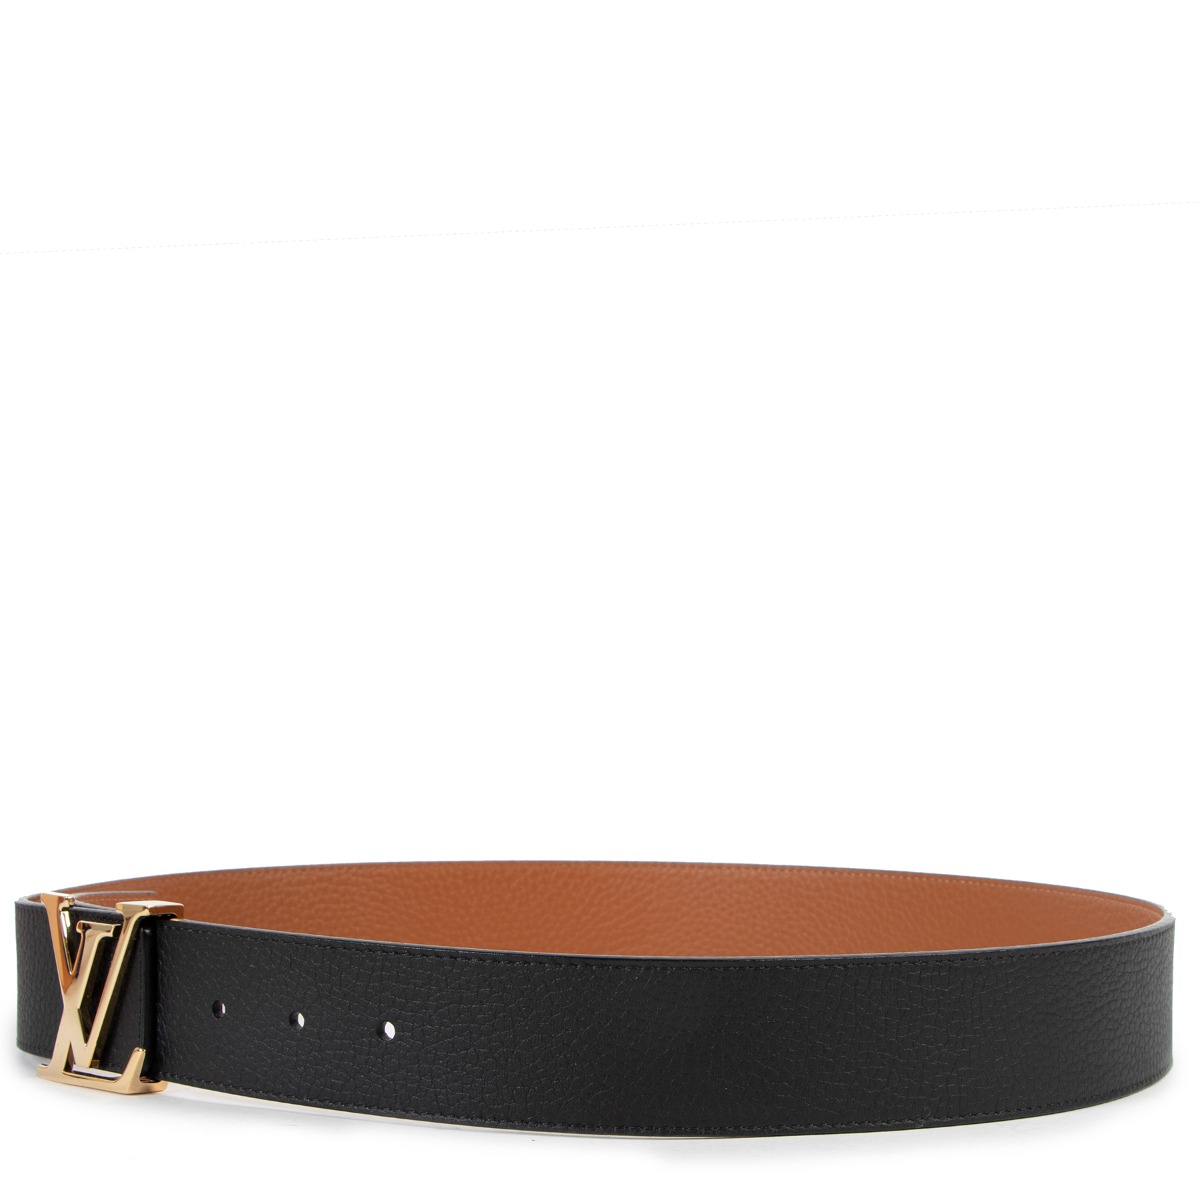 Lv circle leather belt Louis Vuitton Black size 95 cm in Leather - 35017598